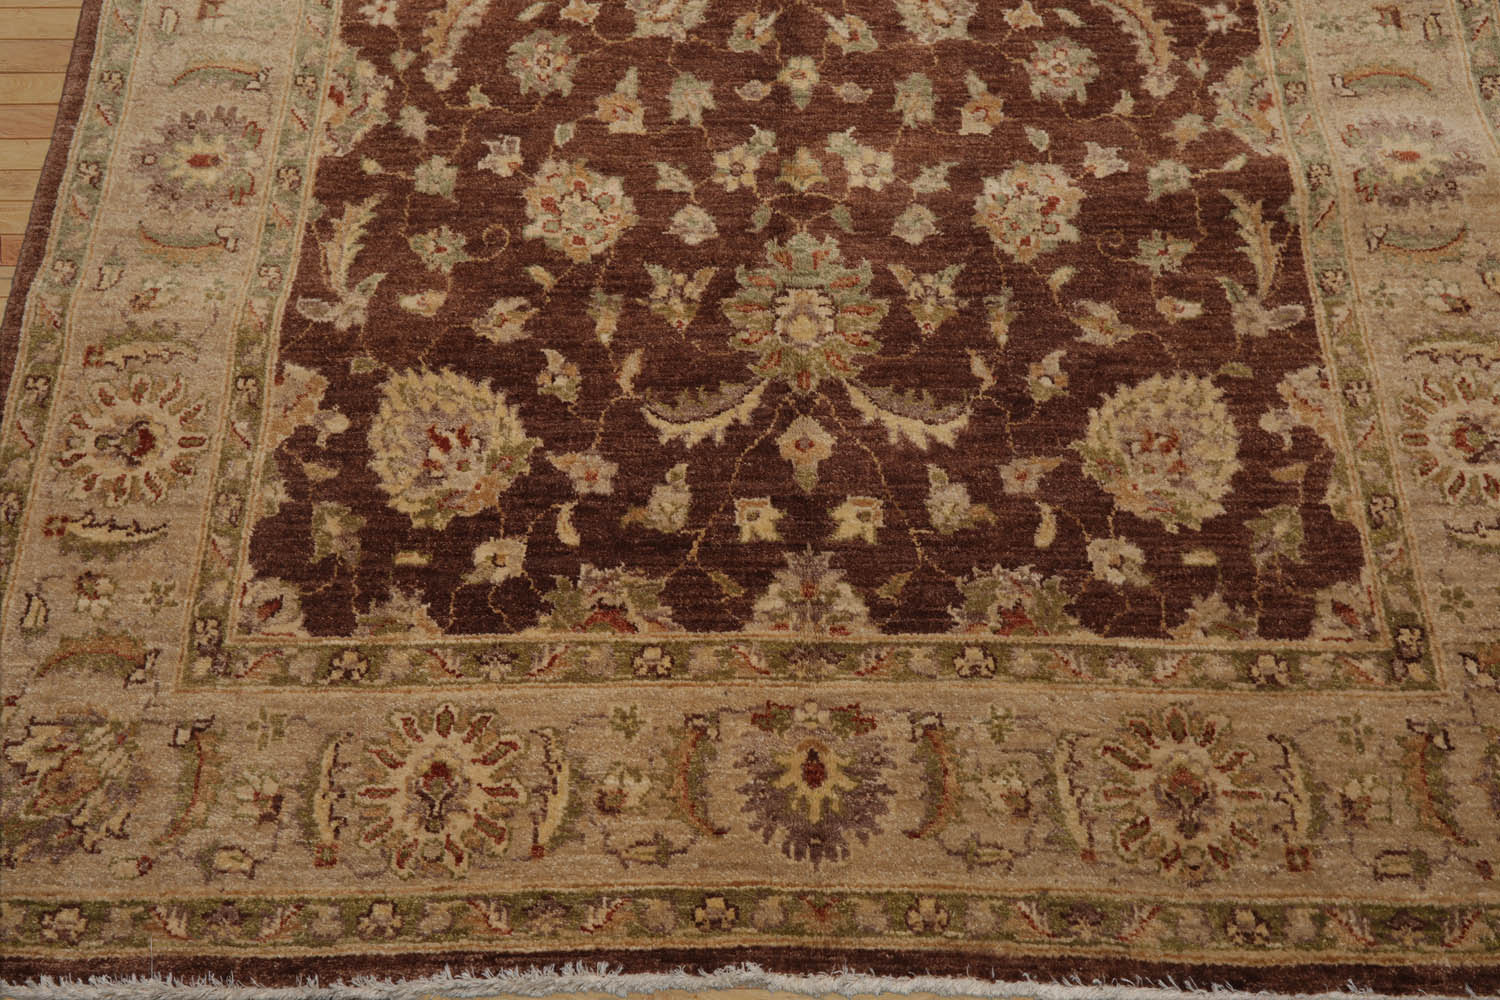 Gennett 5x7 Hand Knotted Persian 100% Wool Chobi Peshawar Traditional Oriental Area Rug Brown, Beige Color